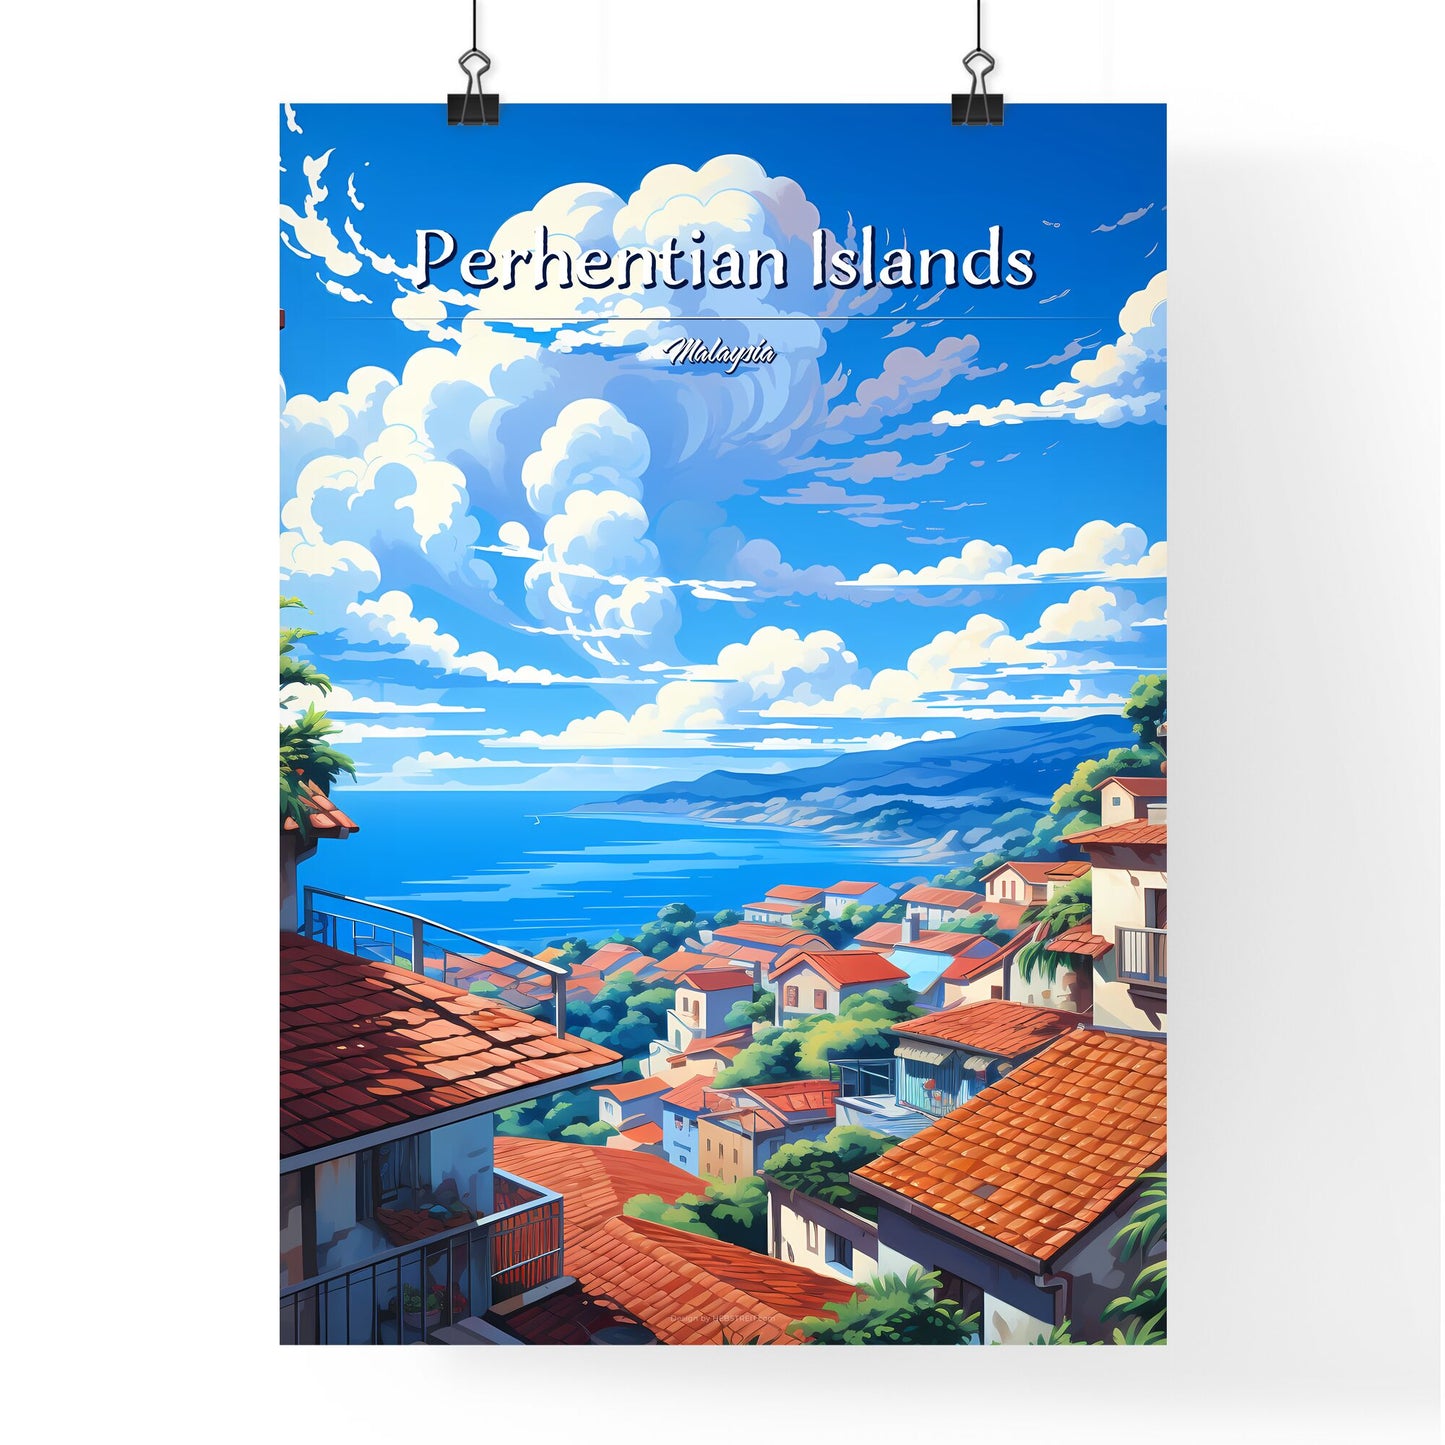 On the roofs of Perhentian Islands, Malaysia - Art print of a red and gold vase with gold sparkles Default Title